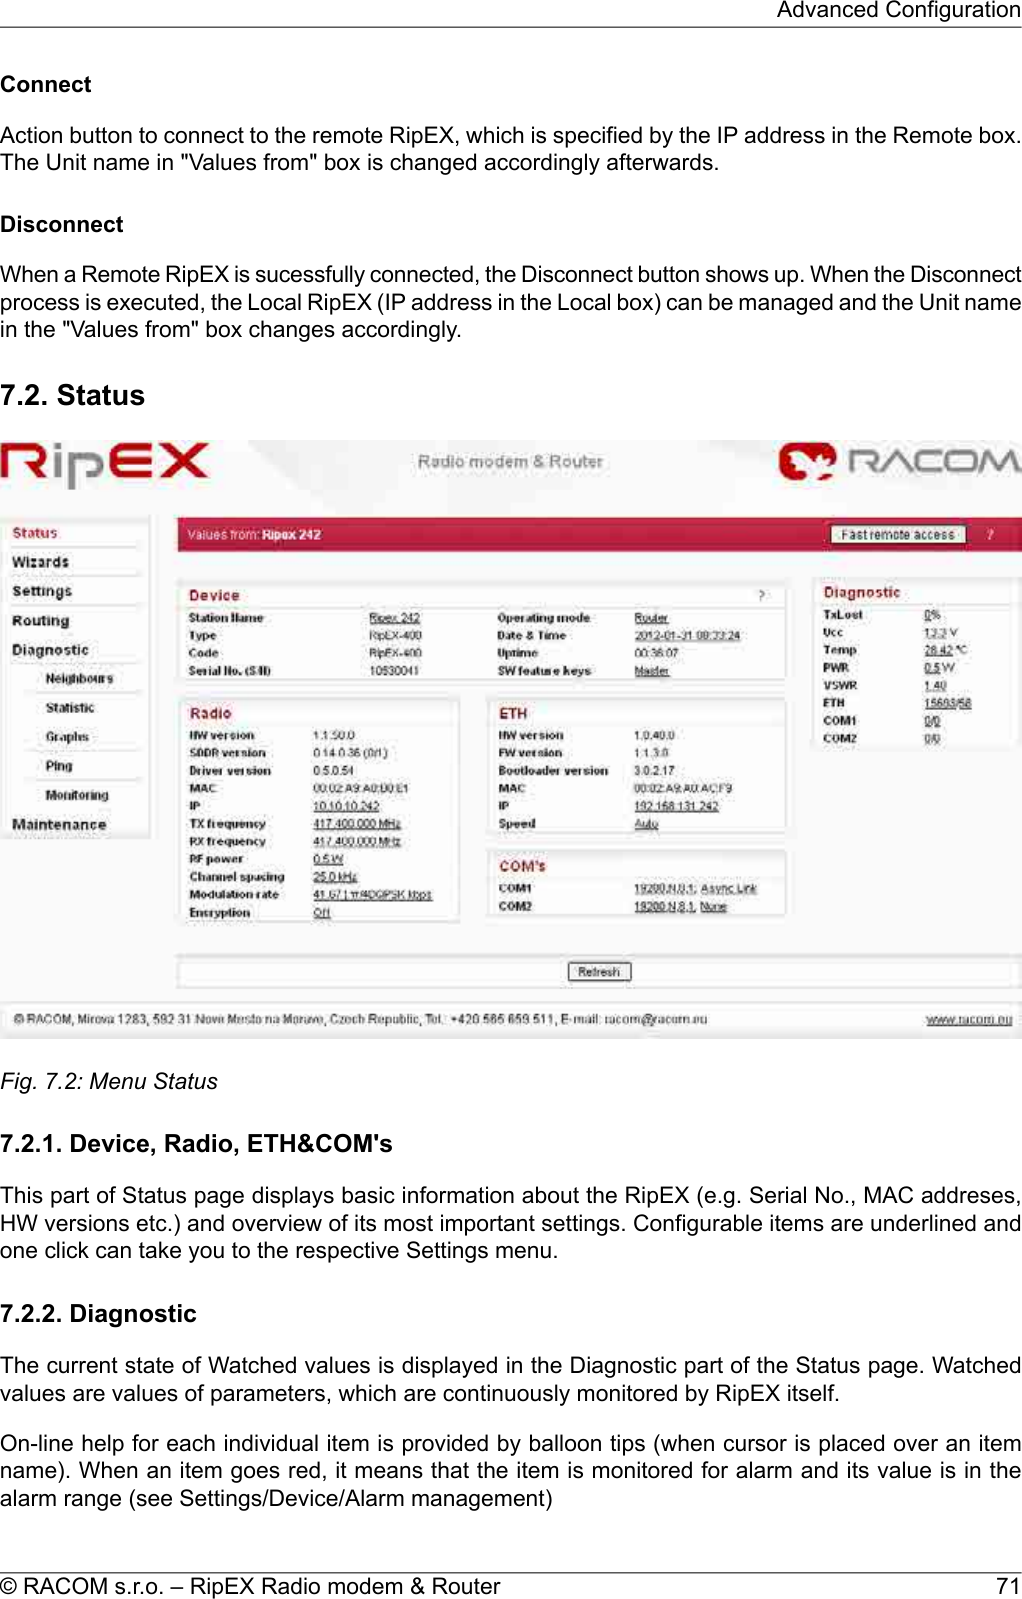 ConnectAction button to connect to the remote RipEX, which is specified by the IP address in the Remote box.The Unit name in &quot;Values from&quot; box is changed accordingly afterwards.DisconnectWhen a Remote RipEX is sucessfully connected, the Disconnect button shows up. When the Disconnectprocess is executed, the Local RipEX (IP address in the Local box) can be managed and the Unit namein the &quot;Values from&quot; box changes accordingly.7.2. StatusFig. 7.2: Menu Status7.2.1. Device, Radio, ETH&amp;COM&apos;sThis part of Status page displays basic information about the RipEX (e.g. Serial No., MAC addreses,HW versions etc.) and overview of its most important settings. Configurable items are underlined andone click can take you to the respective Settings menu.7.2.2. DiagnosticThe current state of Watched values is displayed in the Diagnostic part of the Status page. Watchedvalues are values of parameters, which are continuously monitored by RipEX itself.On-line help for each individual item is provided by balloon tips (when cursor is placed over an itemname). When an item goes red, it means that the item is monitored for alarm and its value is in thealarm range (see Settings/Device/Alarm management)71© RACOM s.r.o. – RipEX Radio modem &amp; RouterAdvanced Configuration